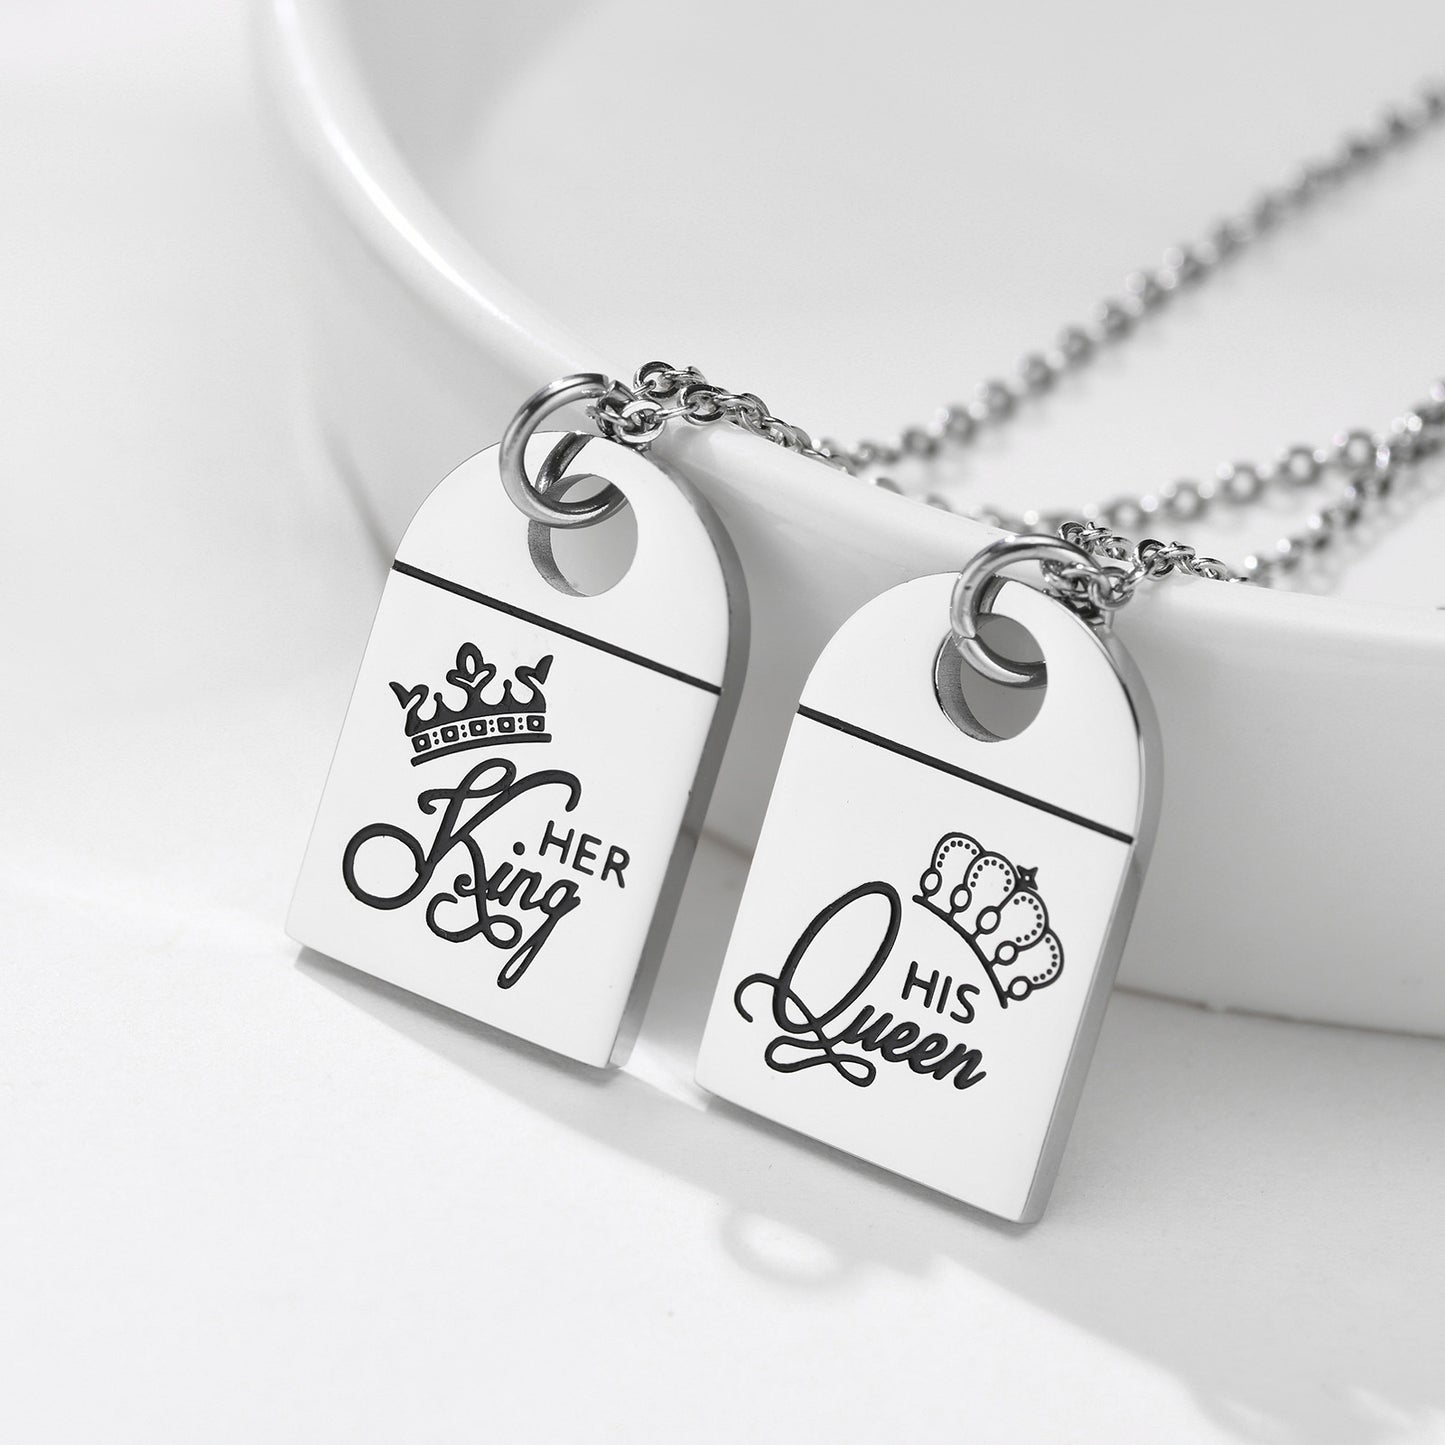 Personalized Her King His Queen Necklaces Set for Couples